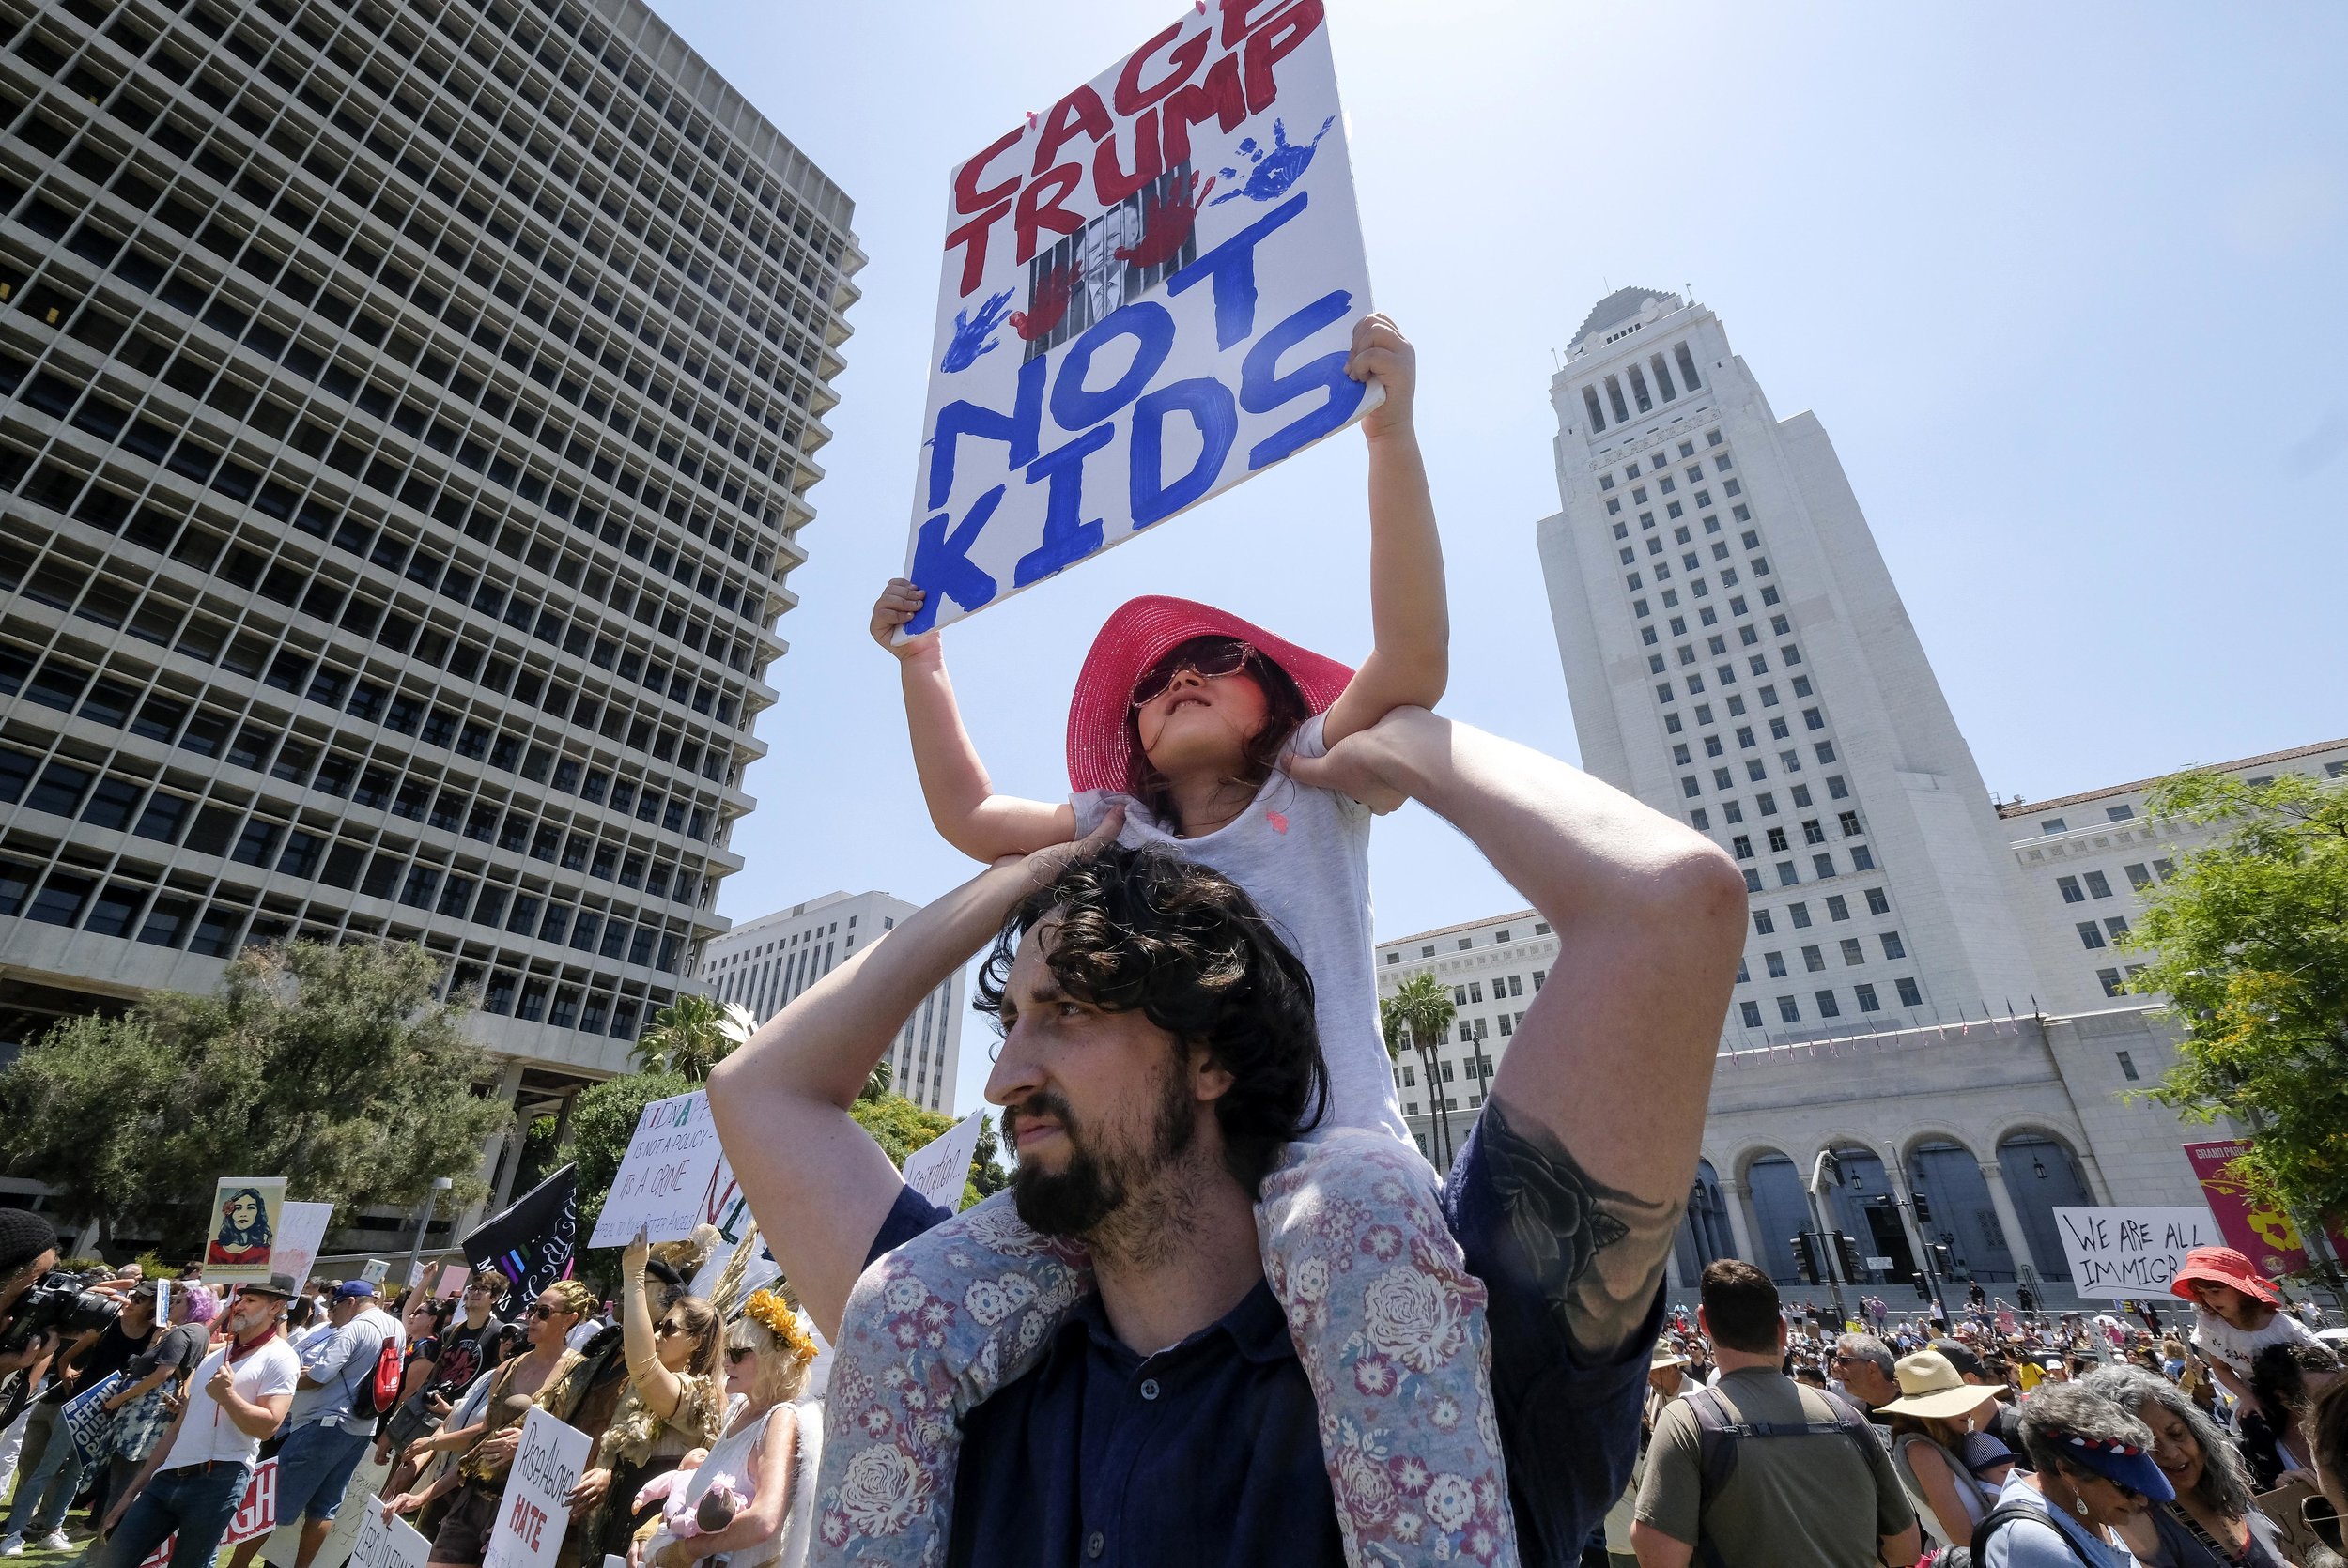  Demonstrators holding signs march against the separation of immigrant families in Los Angeles, the United States, on June 30, 2018. It's one of 600-plus marches to be held across the country to demand an end to separating and detaining families. 